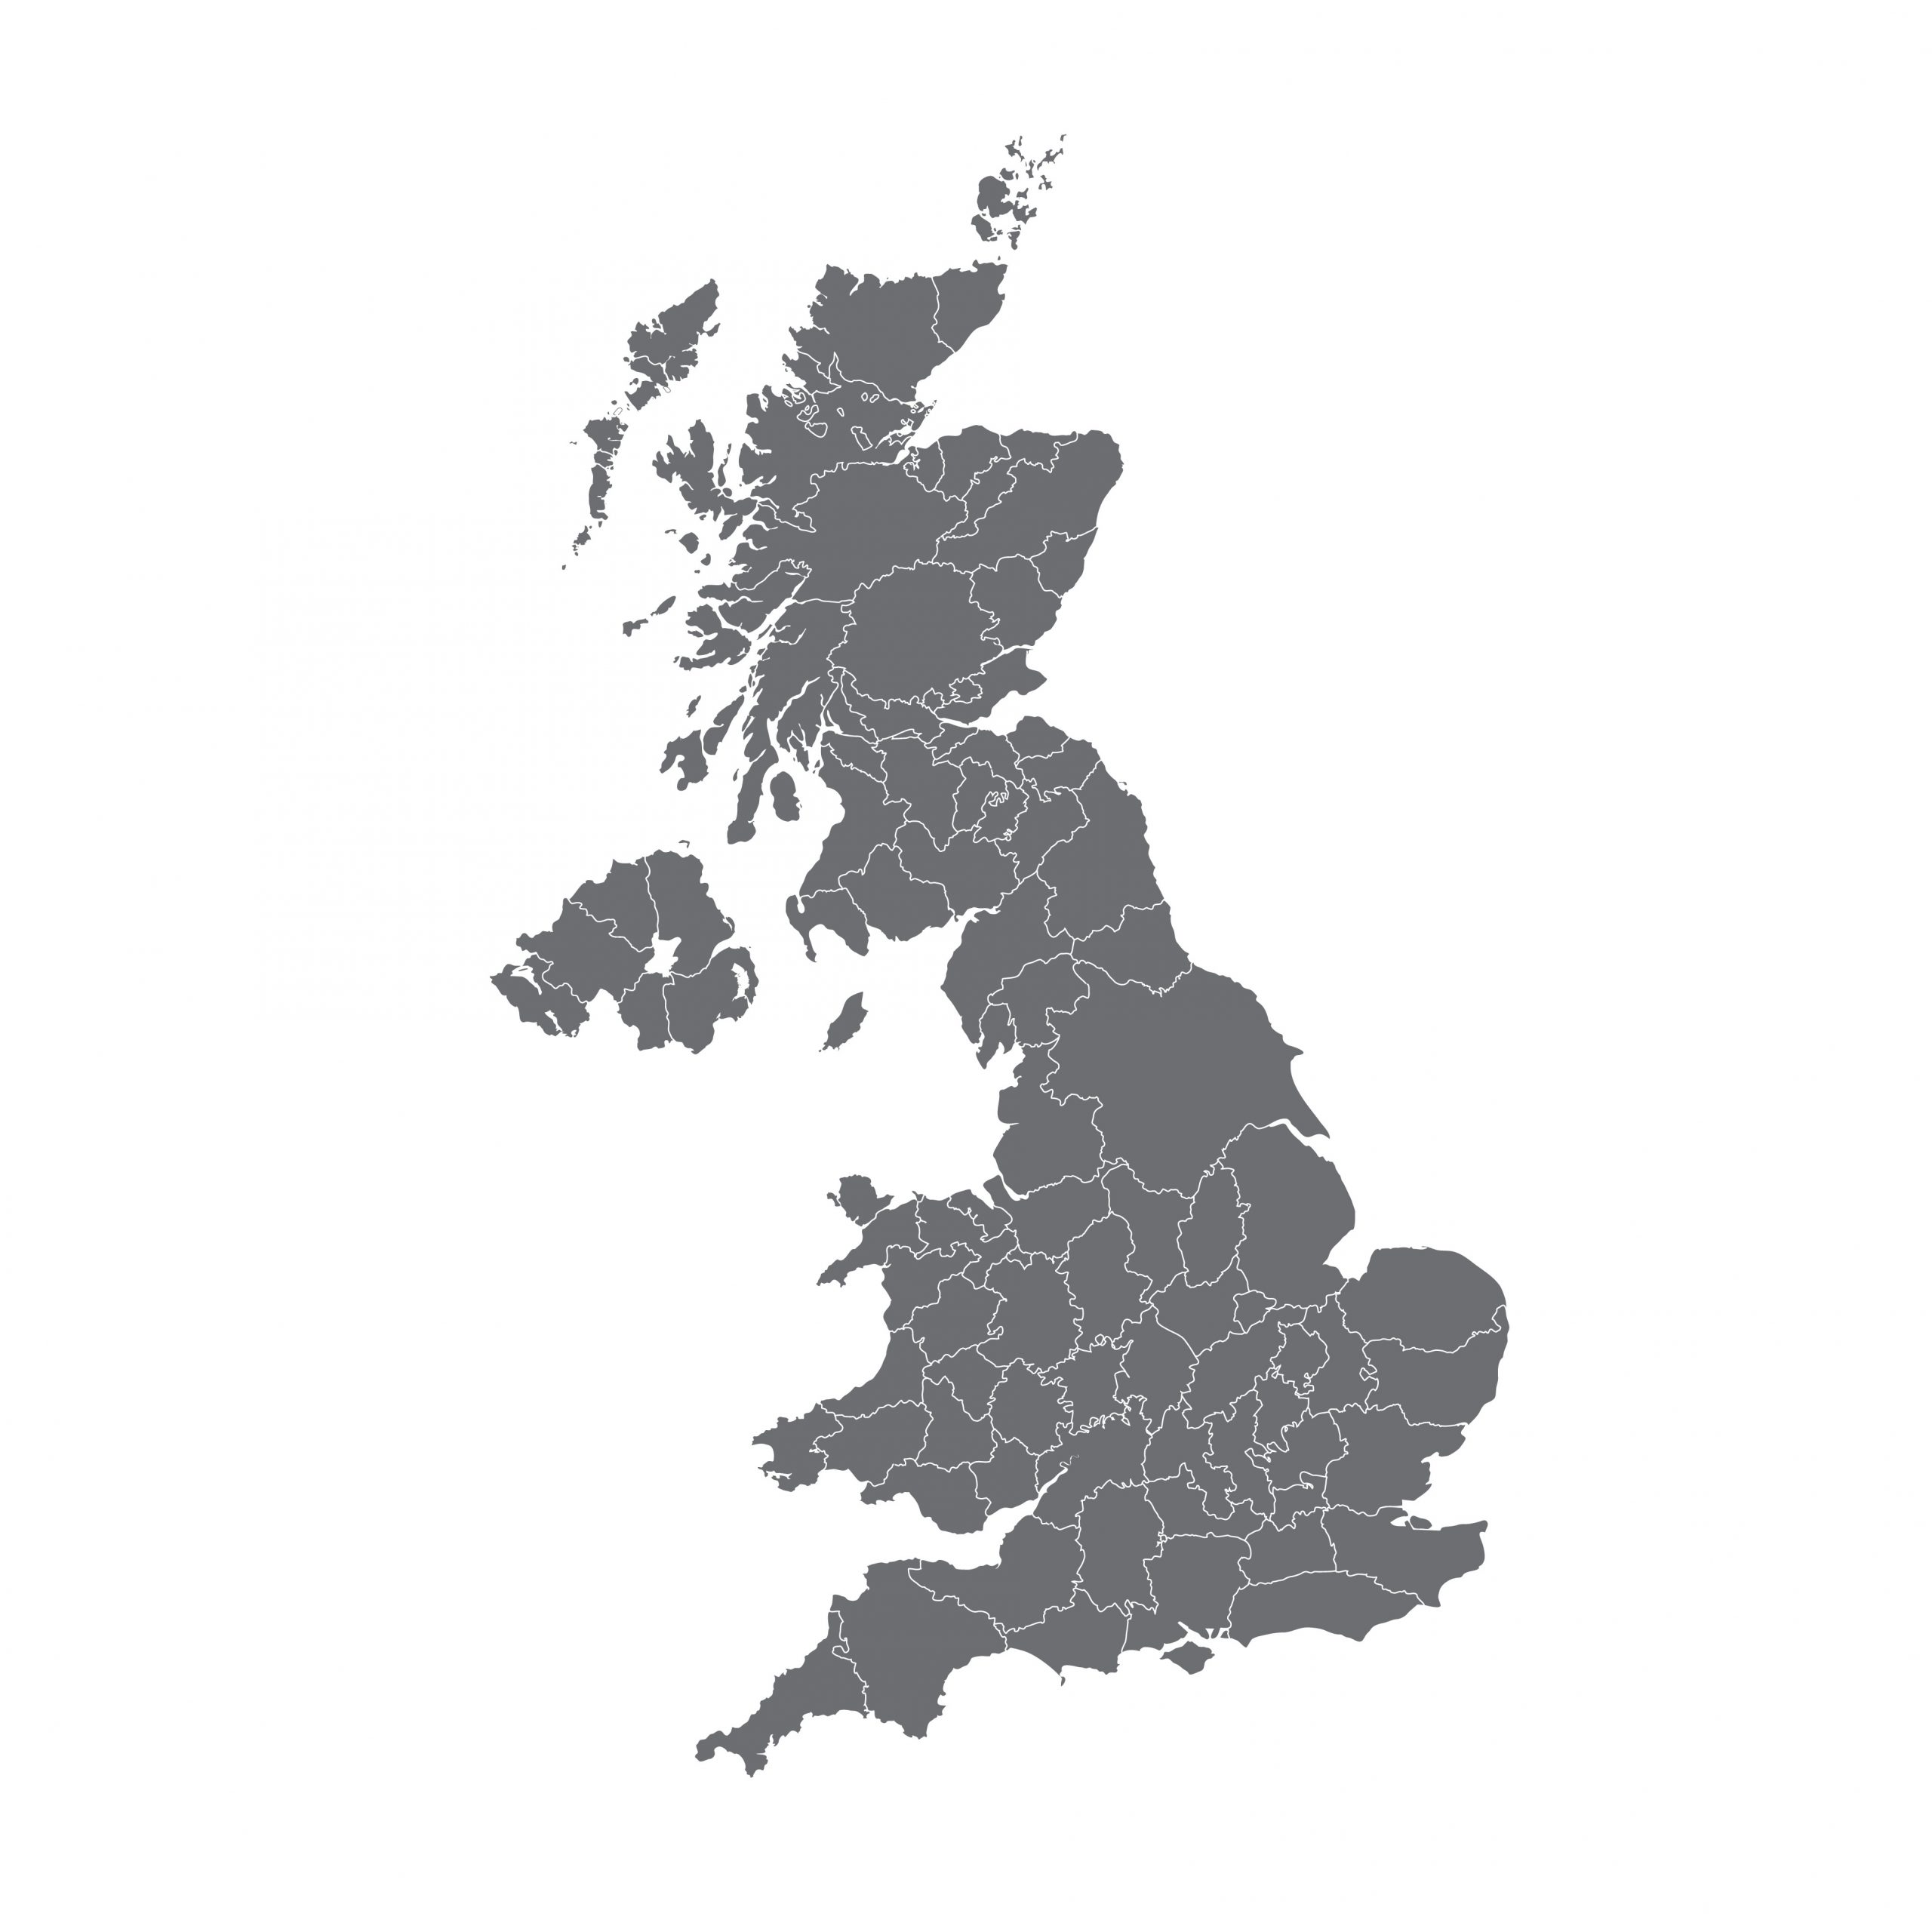 Map of the United Kingdom with county regions